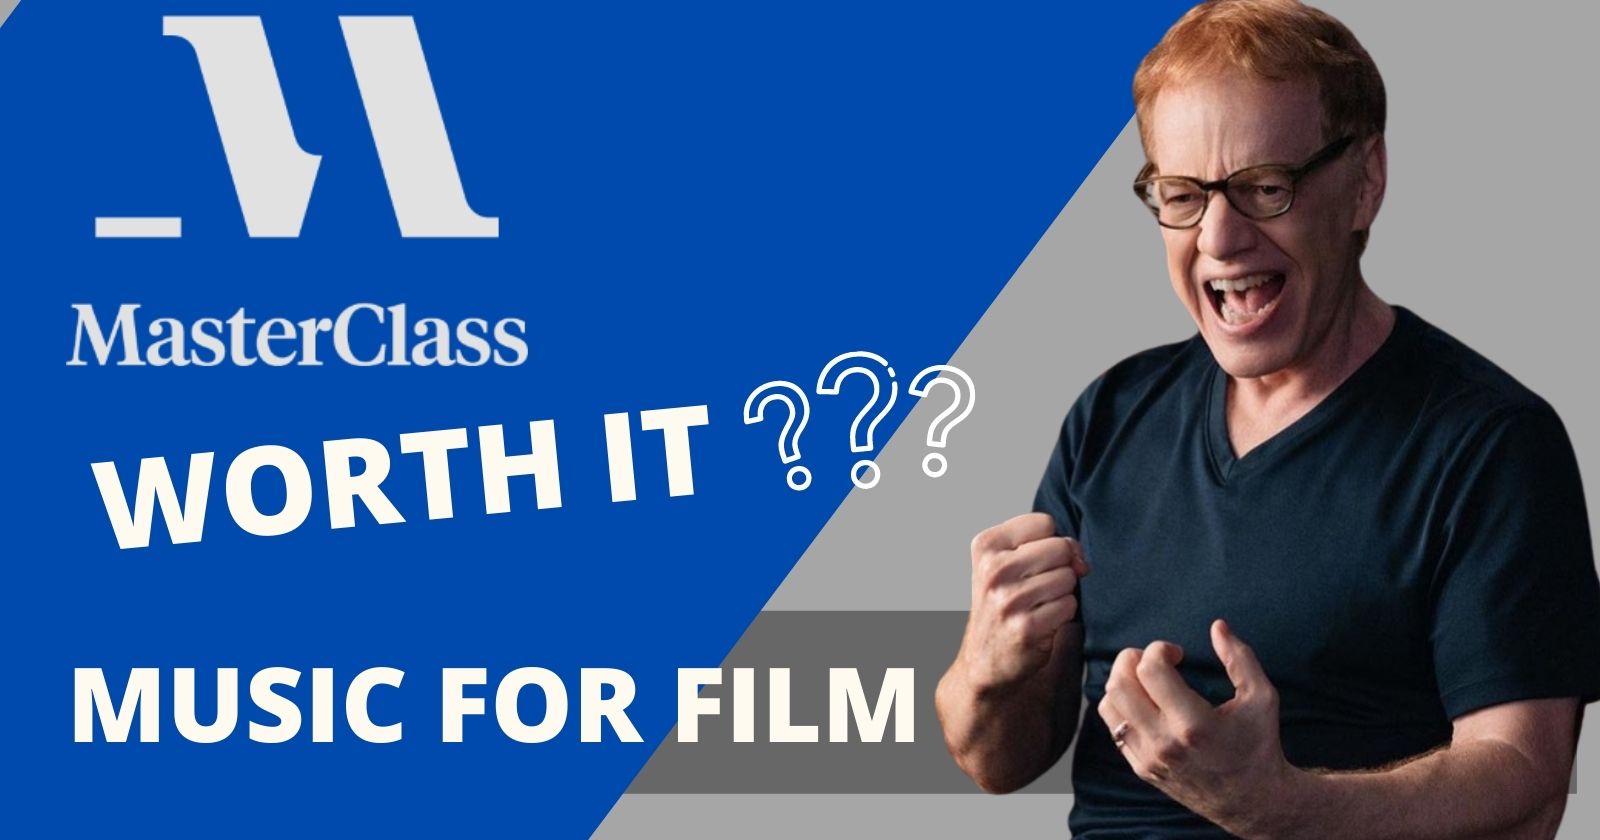 Danny Elfman Masterclass Review Is It Worth It?